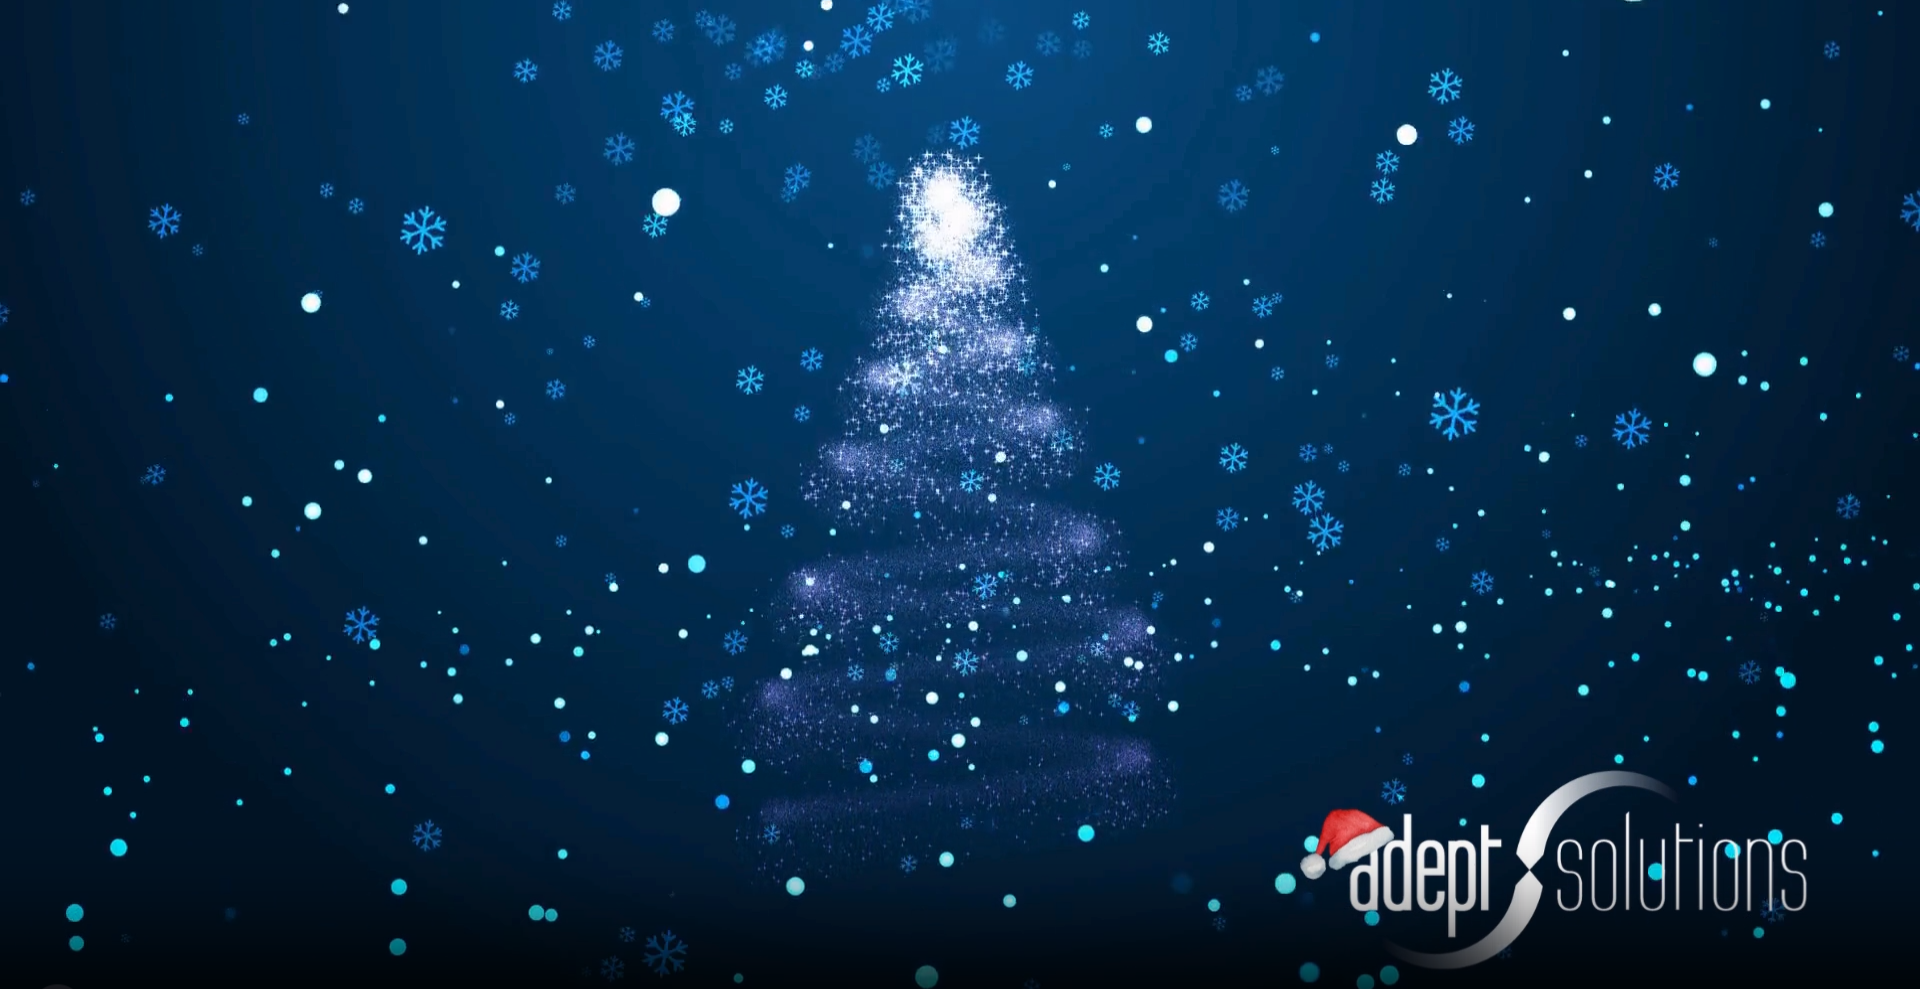 Merry Christmas and a successful New Year from the Adept Solutions Team!